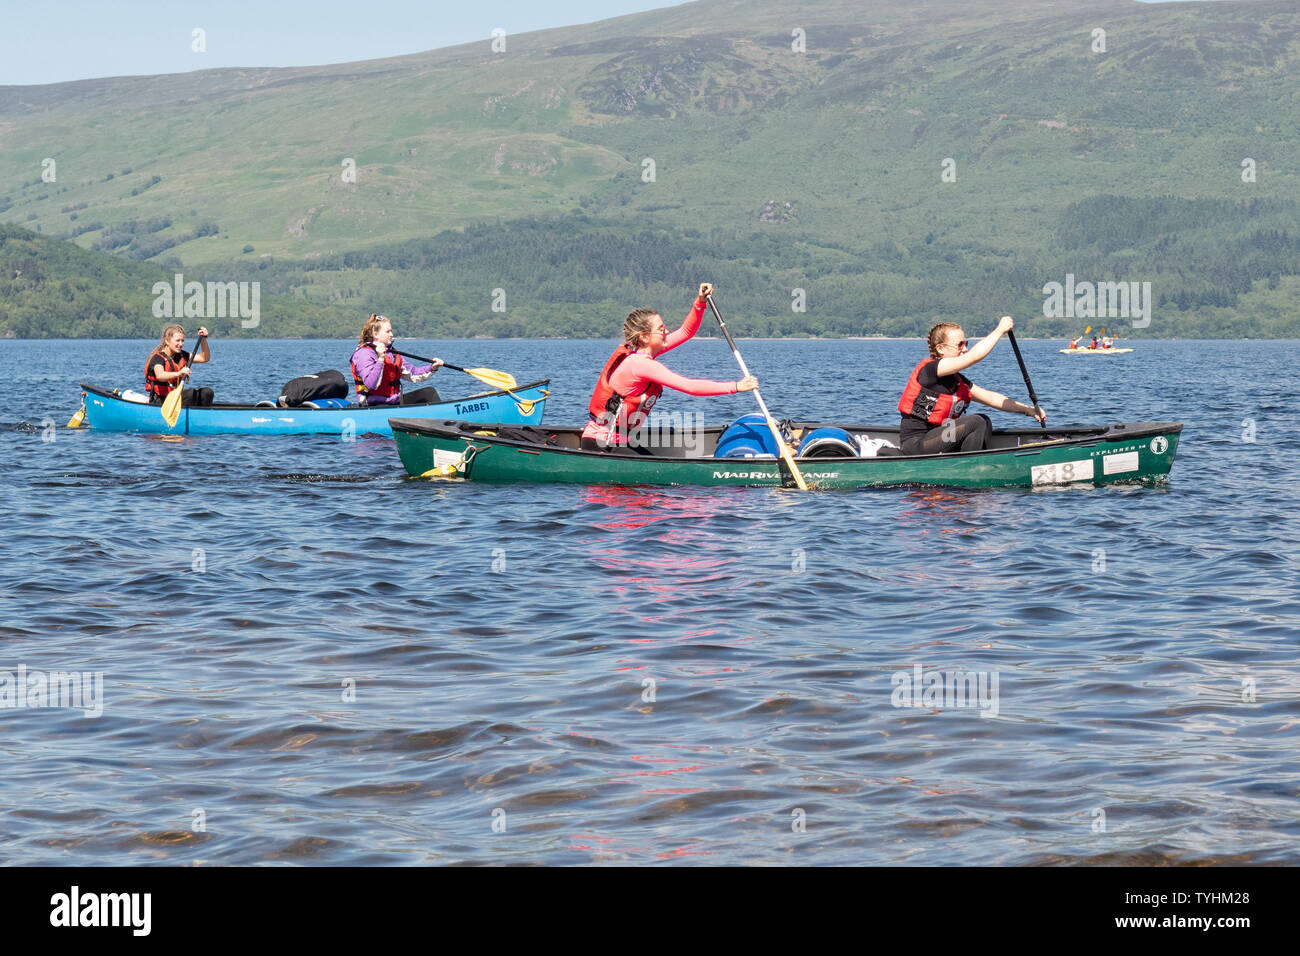 Luss, Loch Lomond, Scotland, UK. 26th June, 2019. UK weather - students from Hillpark Secondary School in Glasgow enjoying brilliant blue skies and bright sunshine this afternoon paddling on Loch Lomond for their Duke of Edinburgh silver expedition Credit: Kay Roxby/Alamy Live News Stock Photo